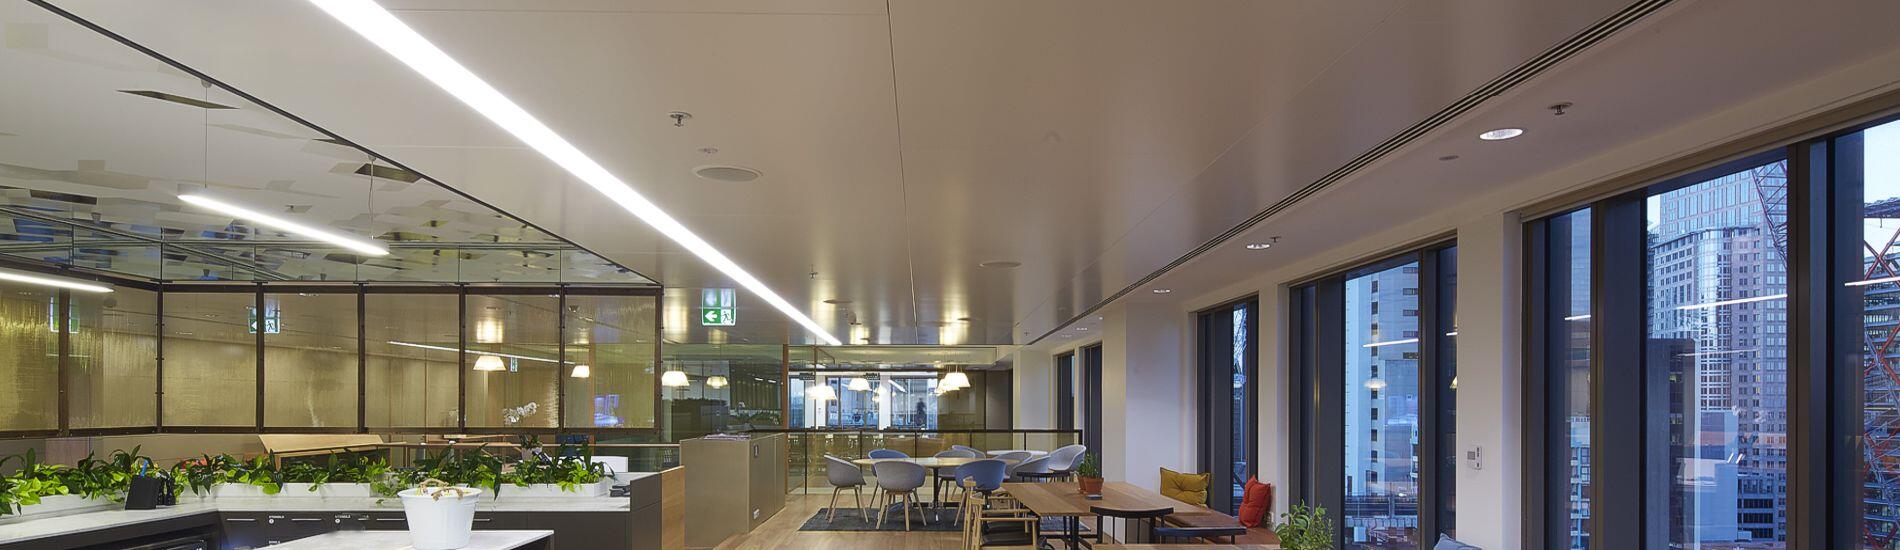 SUPALINE Decorative Ceiling Panels Help Reflect LIght Throughout Vast Area of Workplace